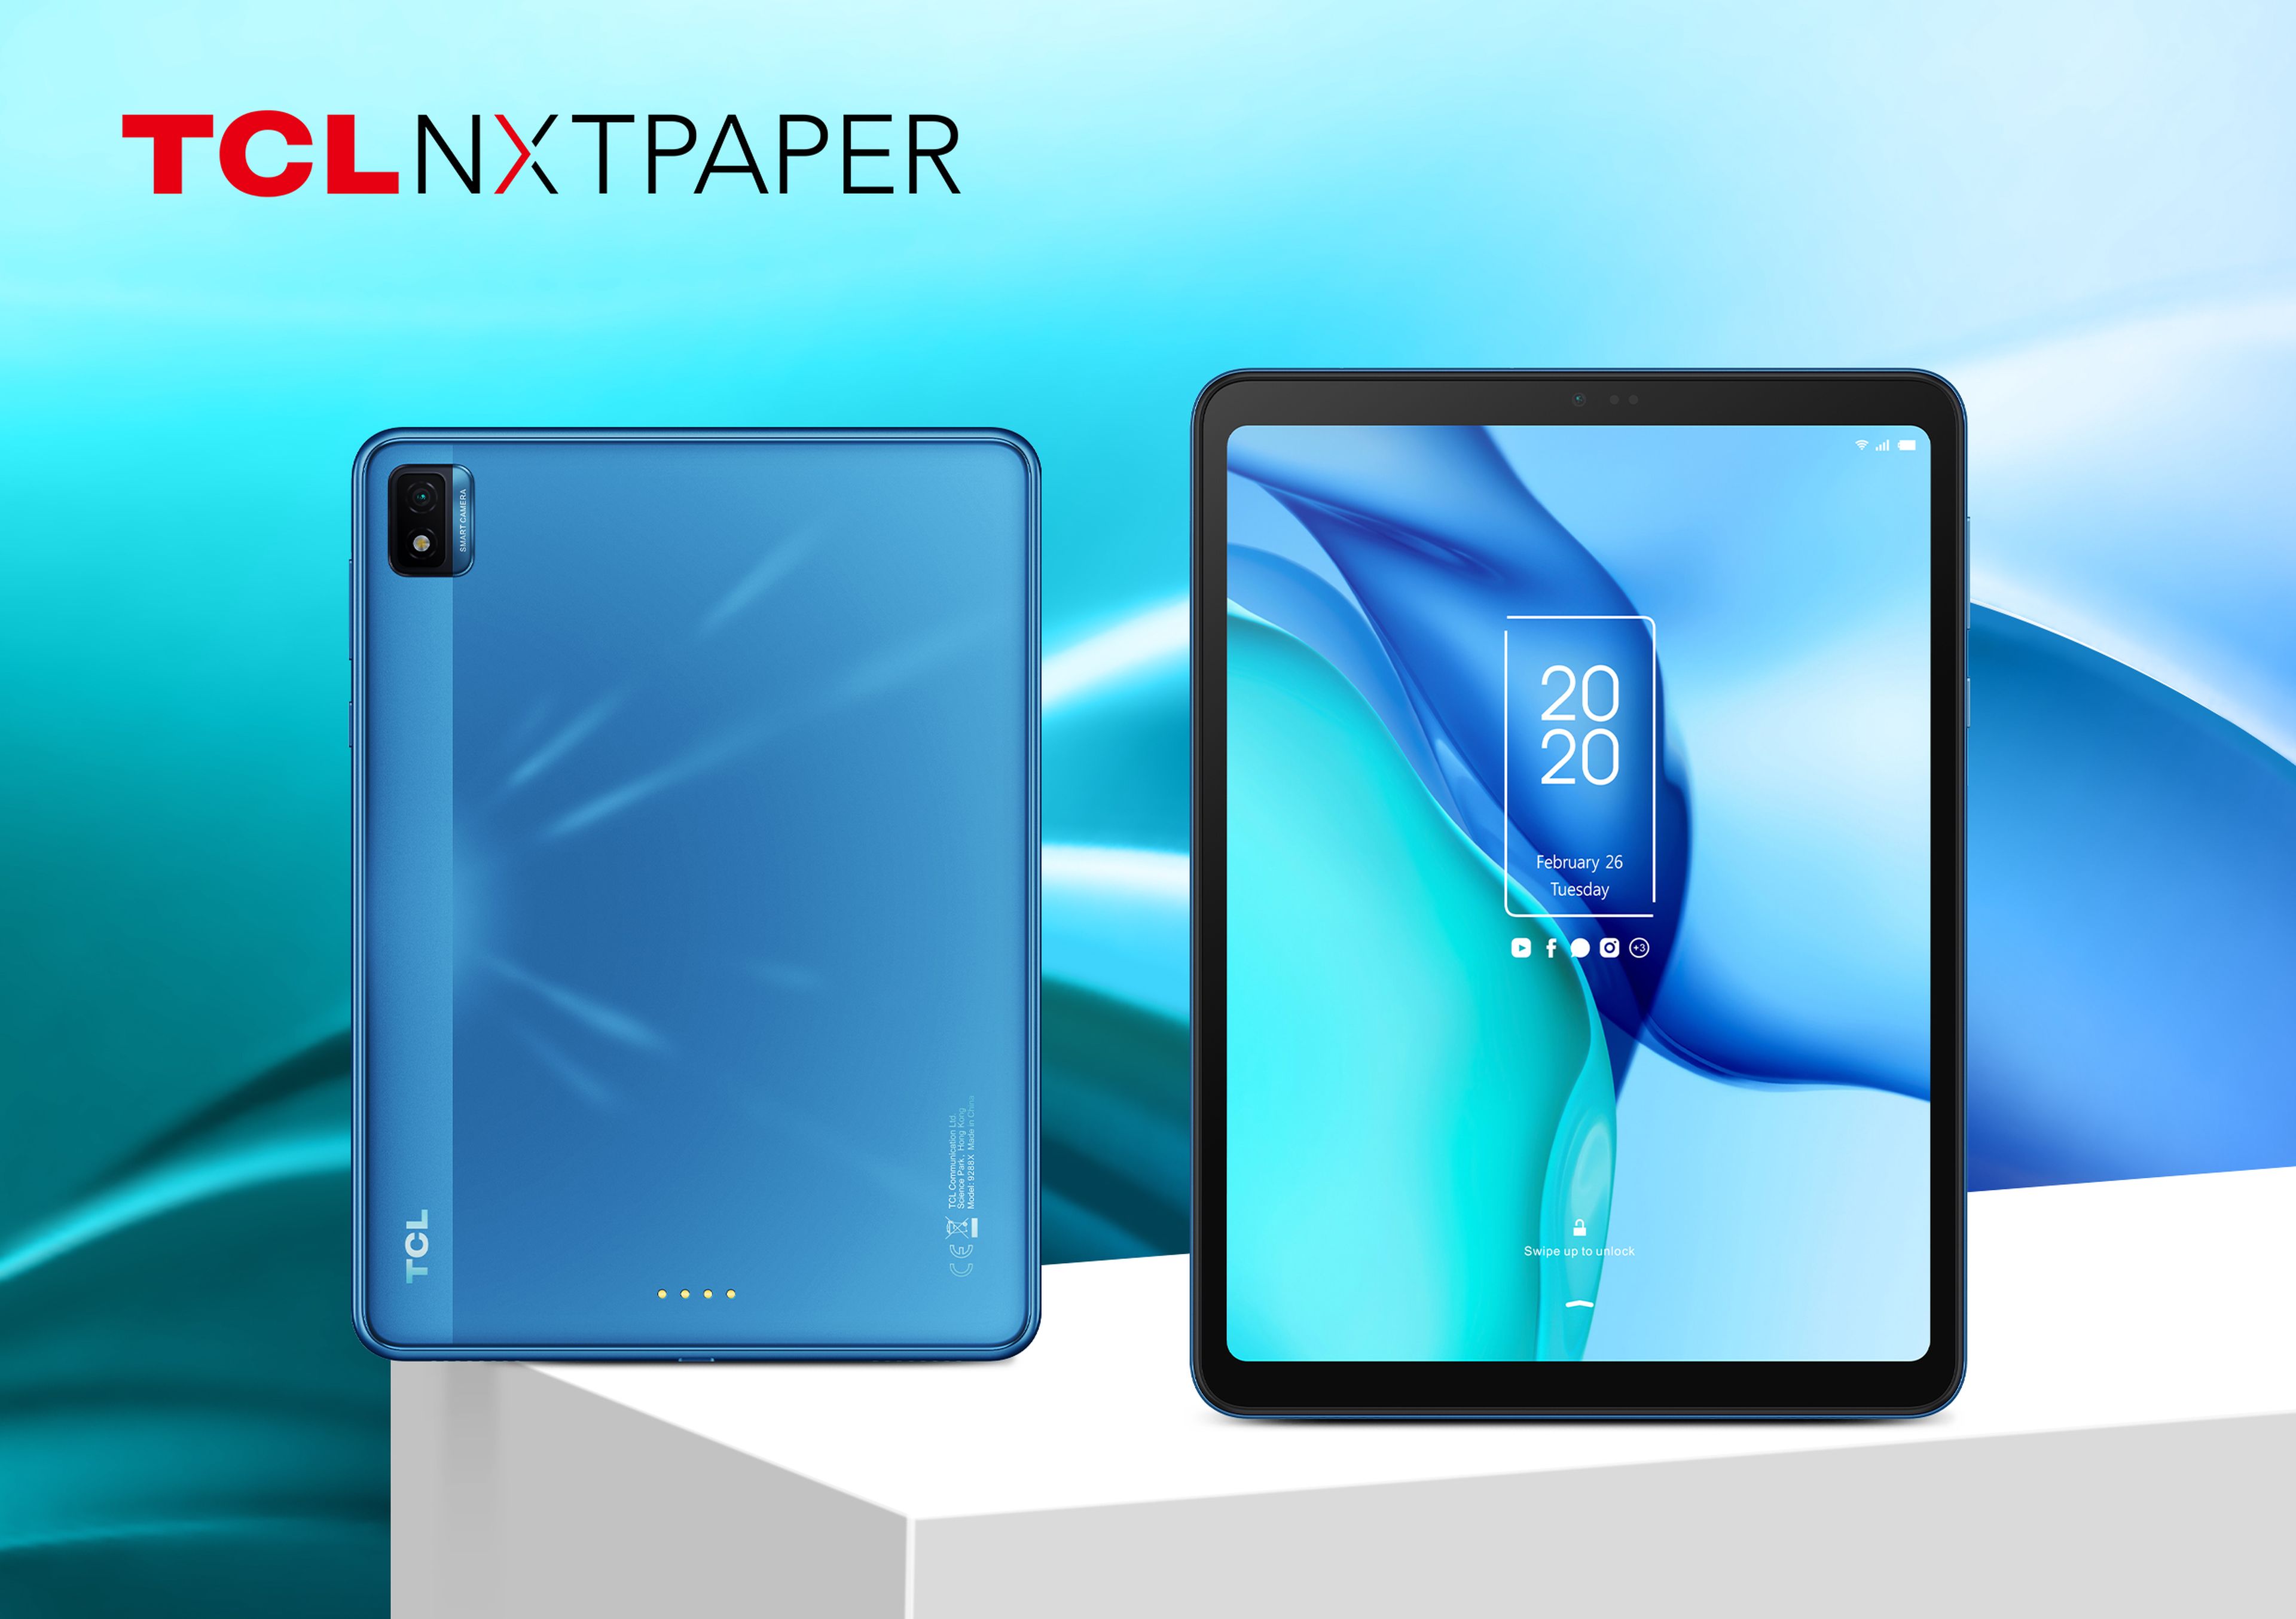 TCL NXTPAPER